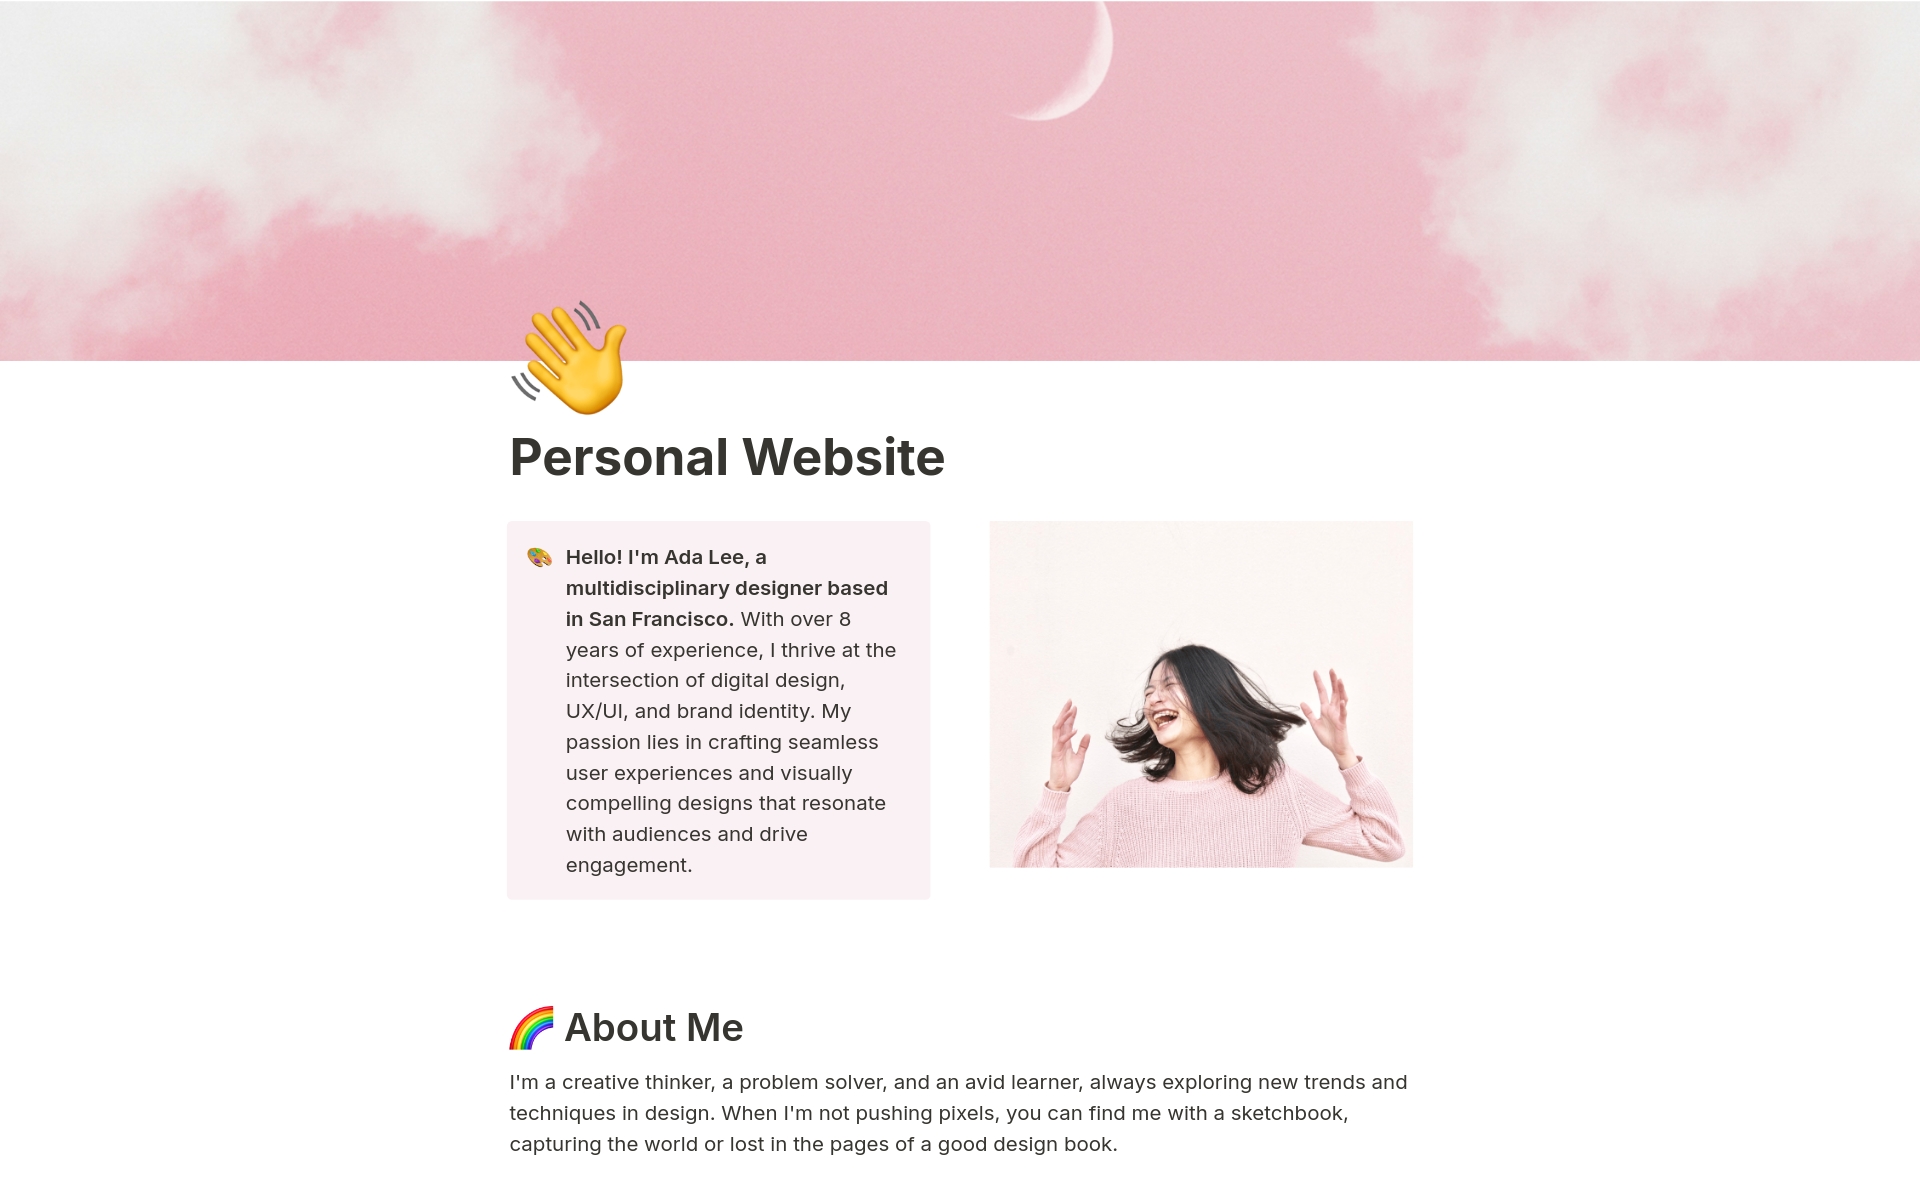 Create a stunning personal website right in your workspace. This template lets you craft an online website that stands out. Easily share your site with a link in your job applications, and update it anytime to keep it fresh—even after sending it out.